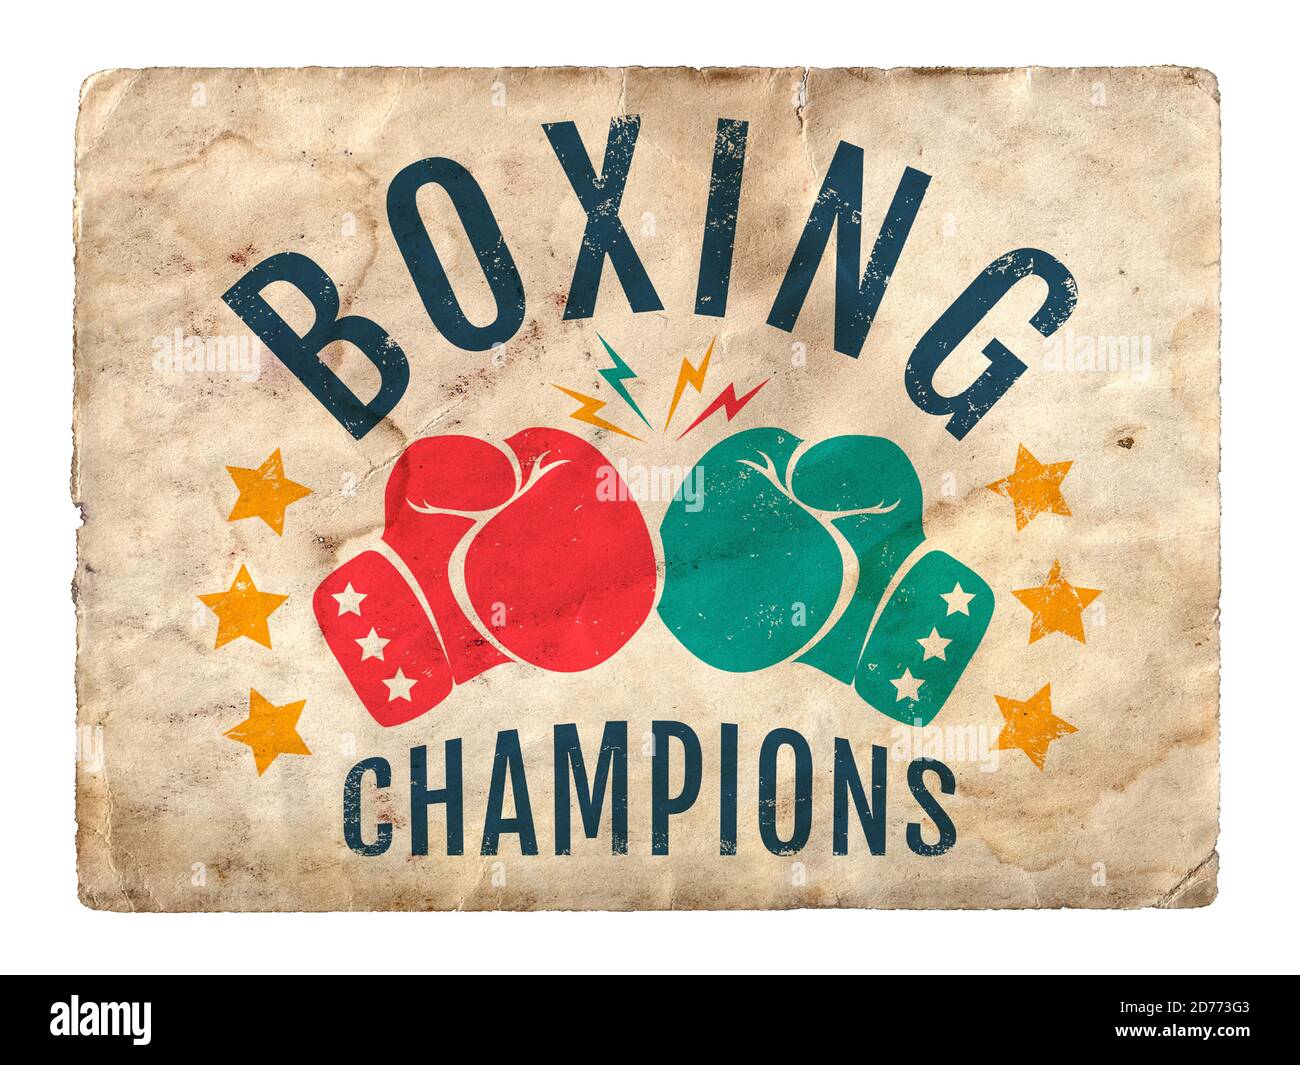 Vintage emblem for a boxing with two gloves. Vintage logo for boxing champions. Stock Photo